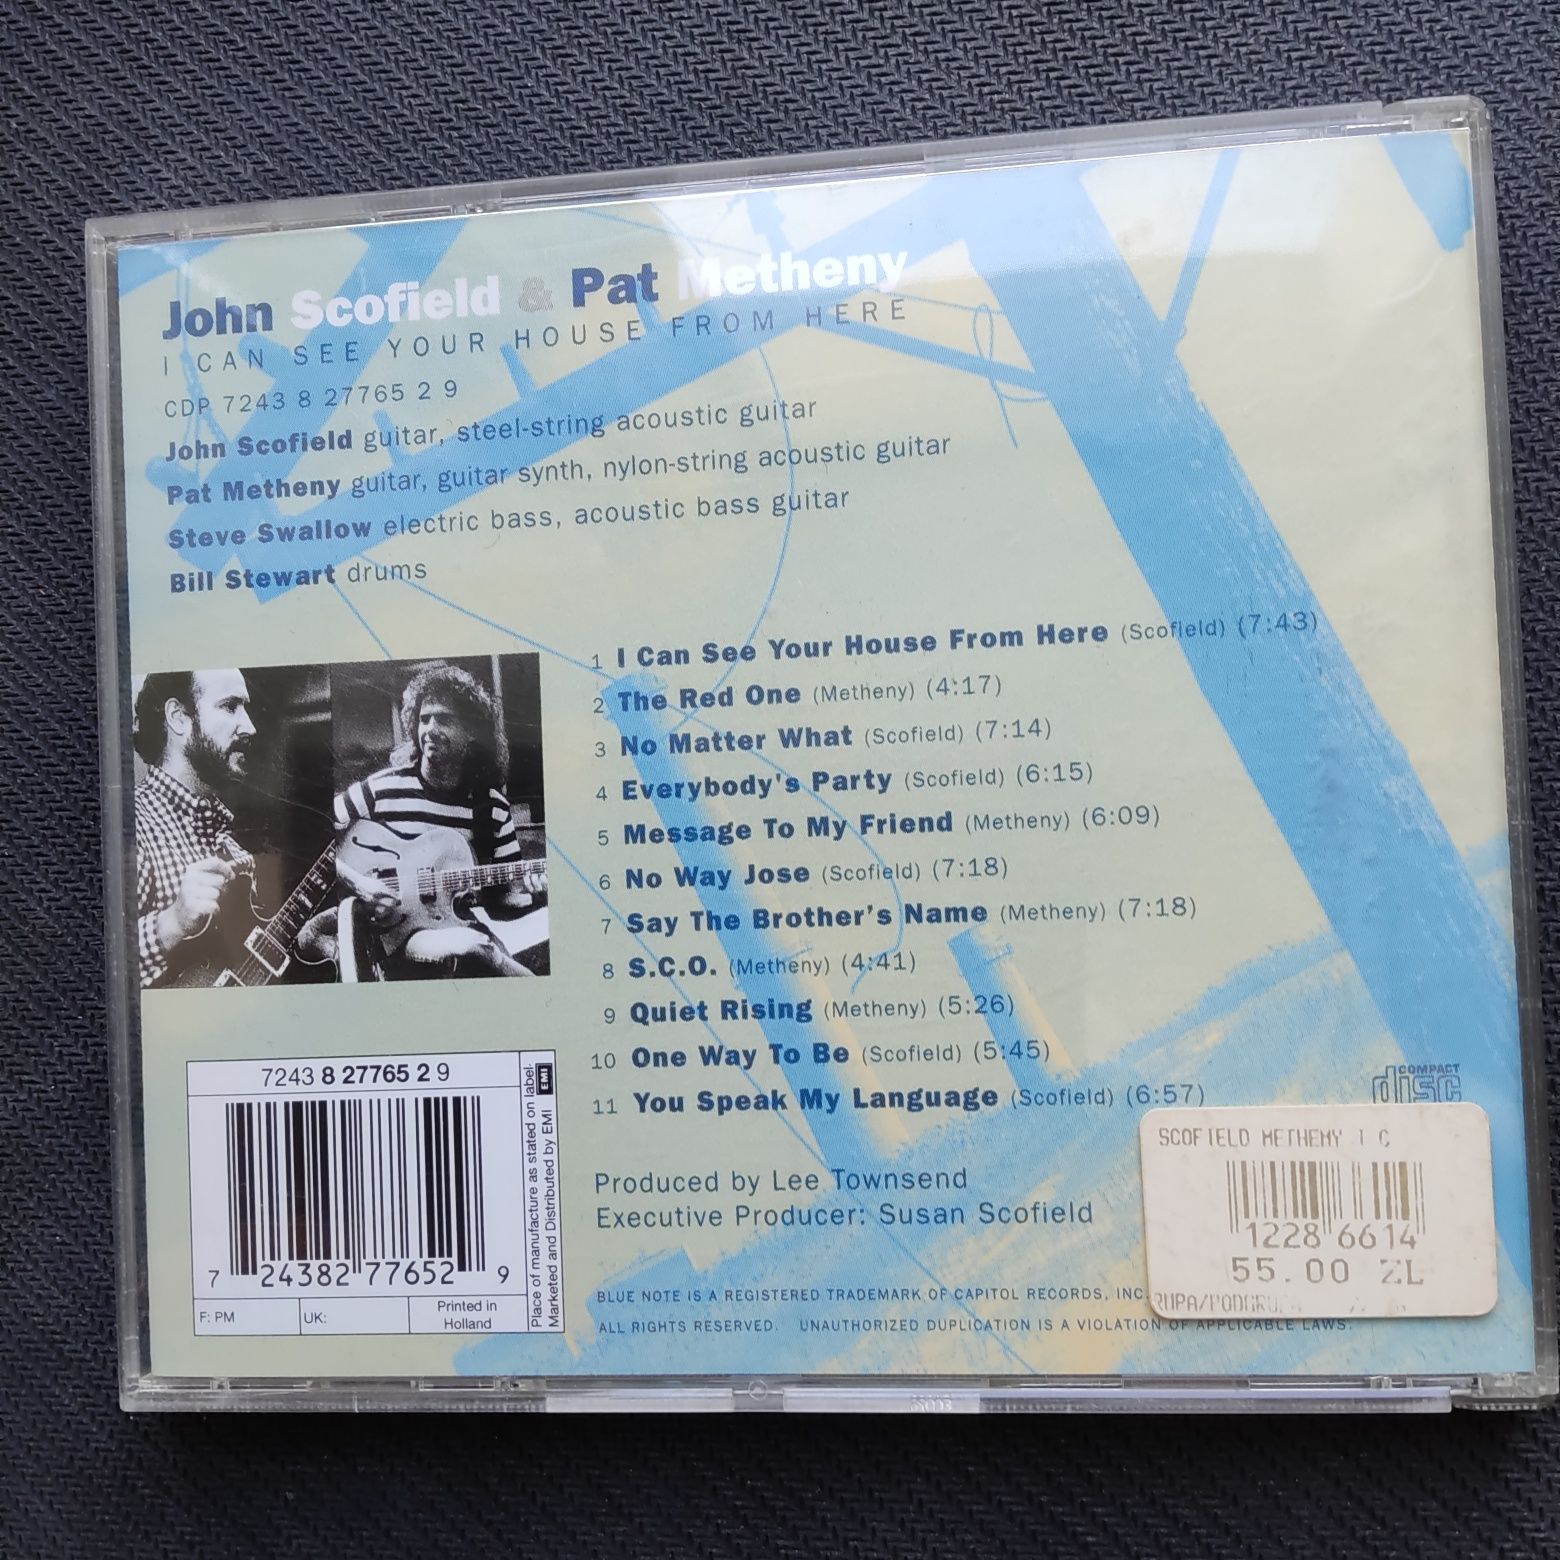 John Scofield & Pat Metheny" I can see your house from here" CD 1994